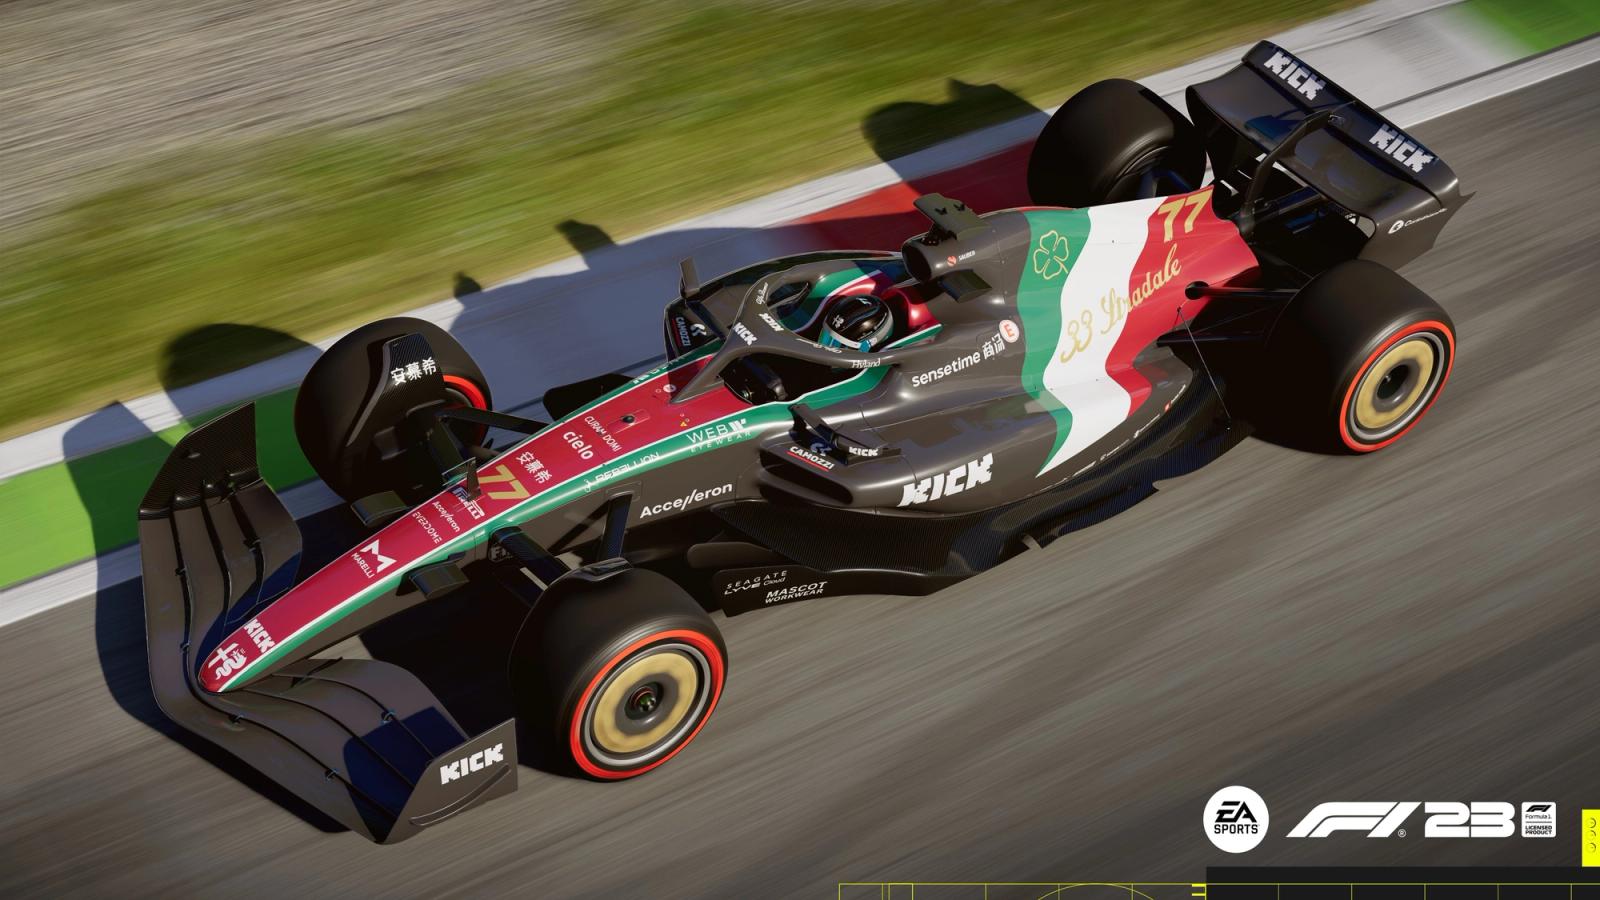 F1 23 Update 1.12 Patch Breaks Equal Performance